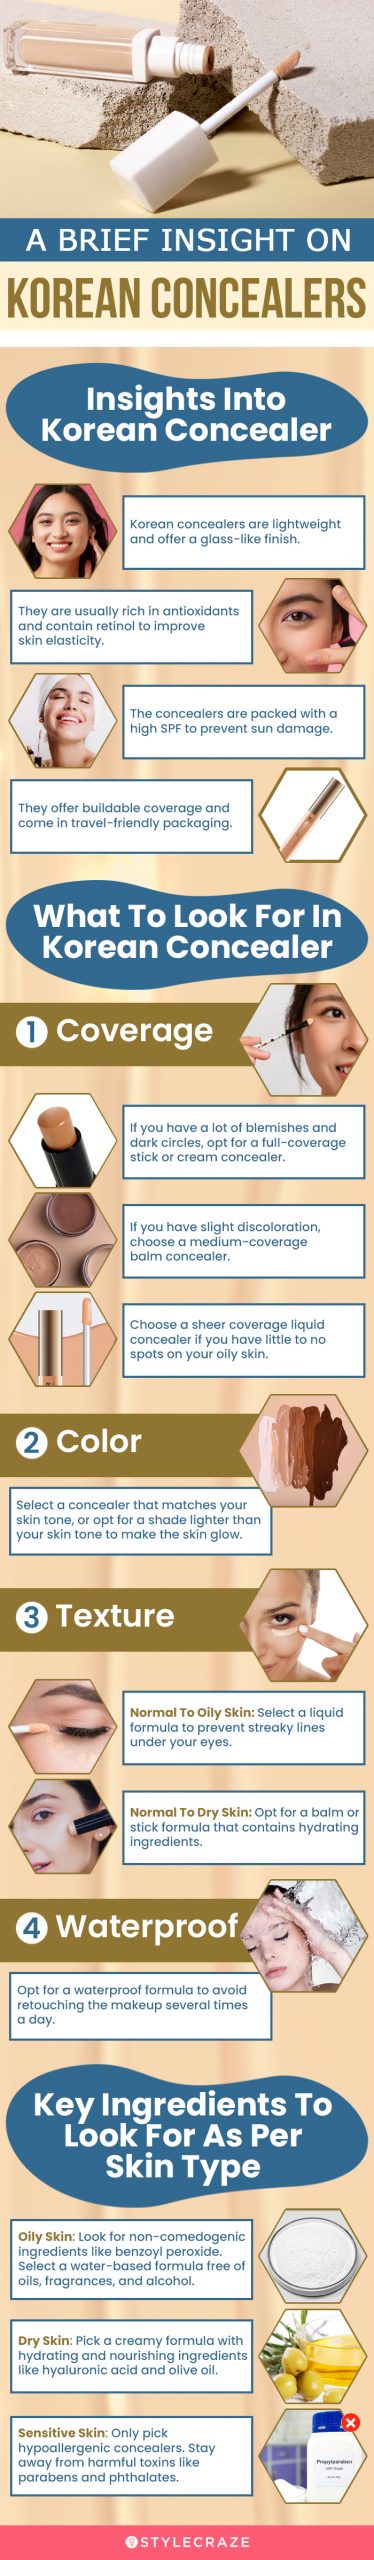 A Brief Insight On Korean Concealers (infographic)